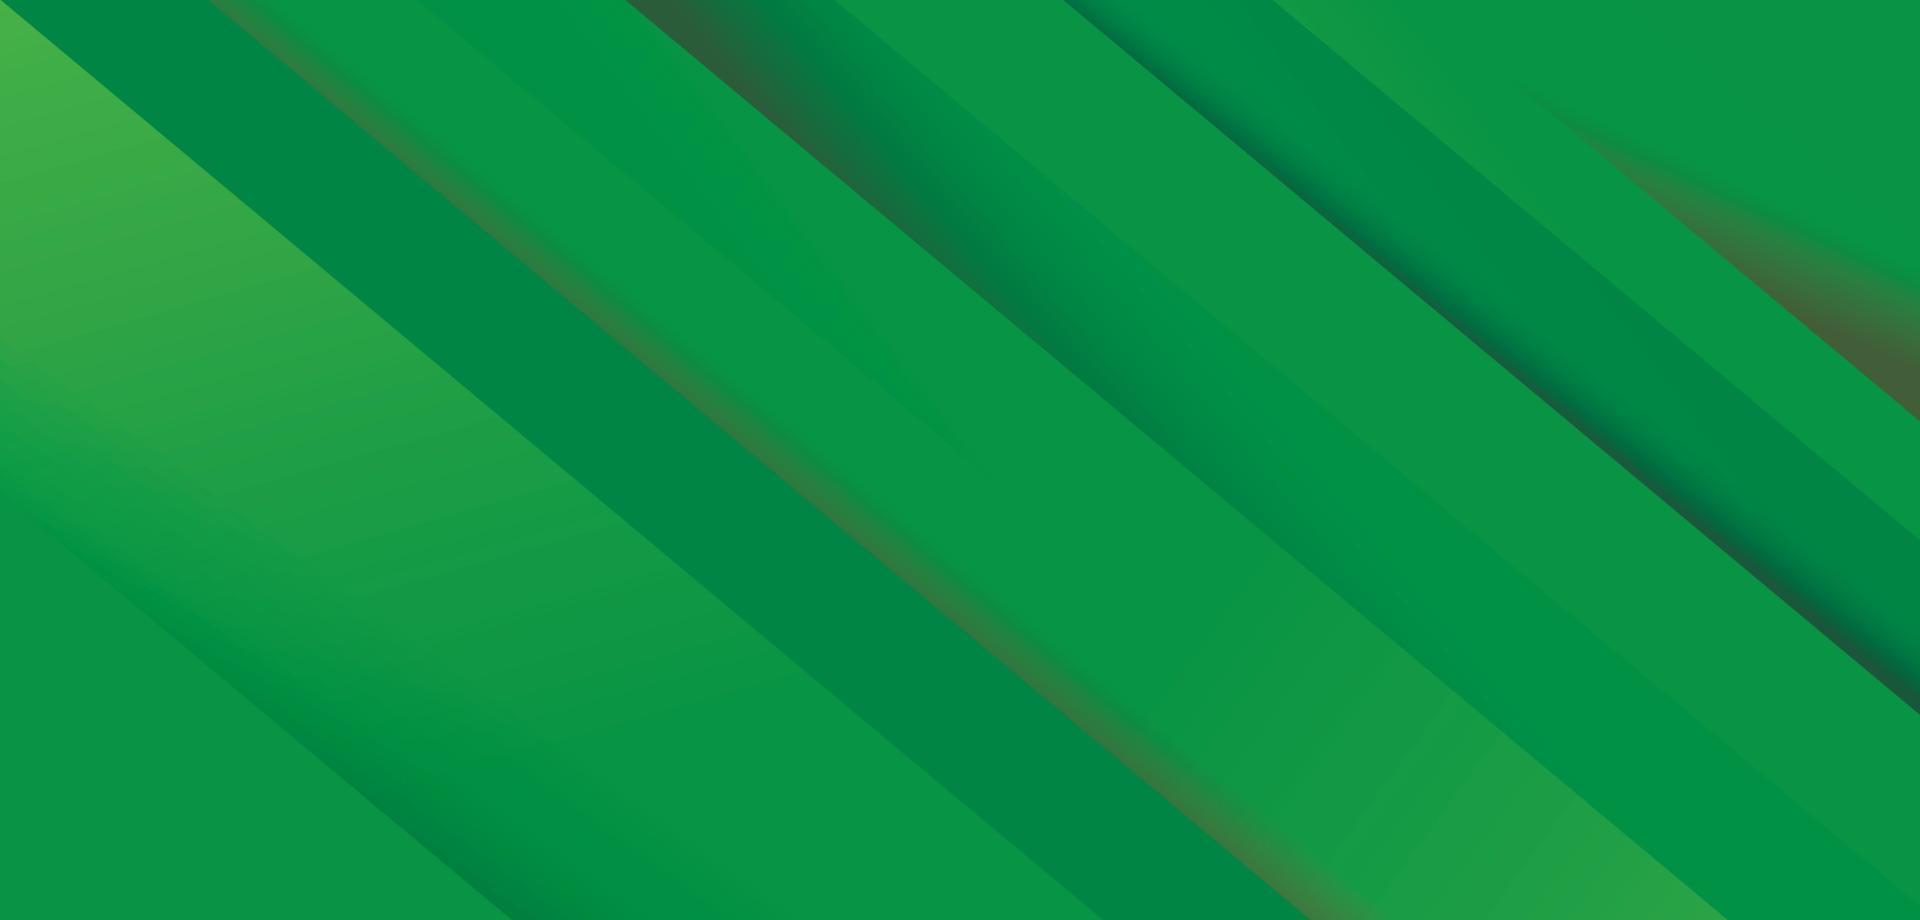 Green Background Abstract free design vector